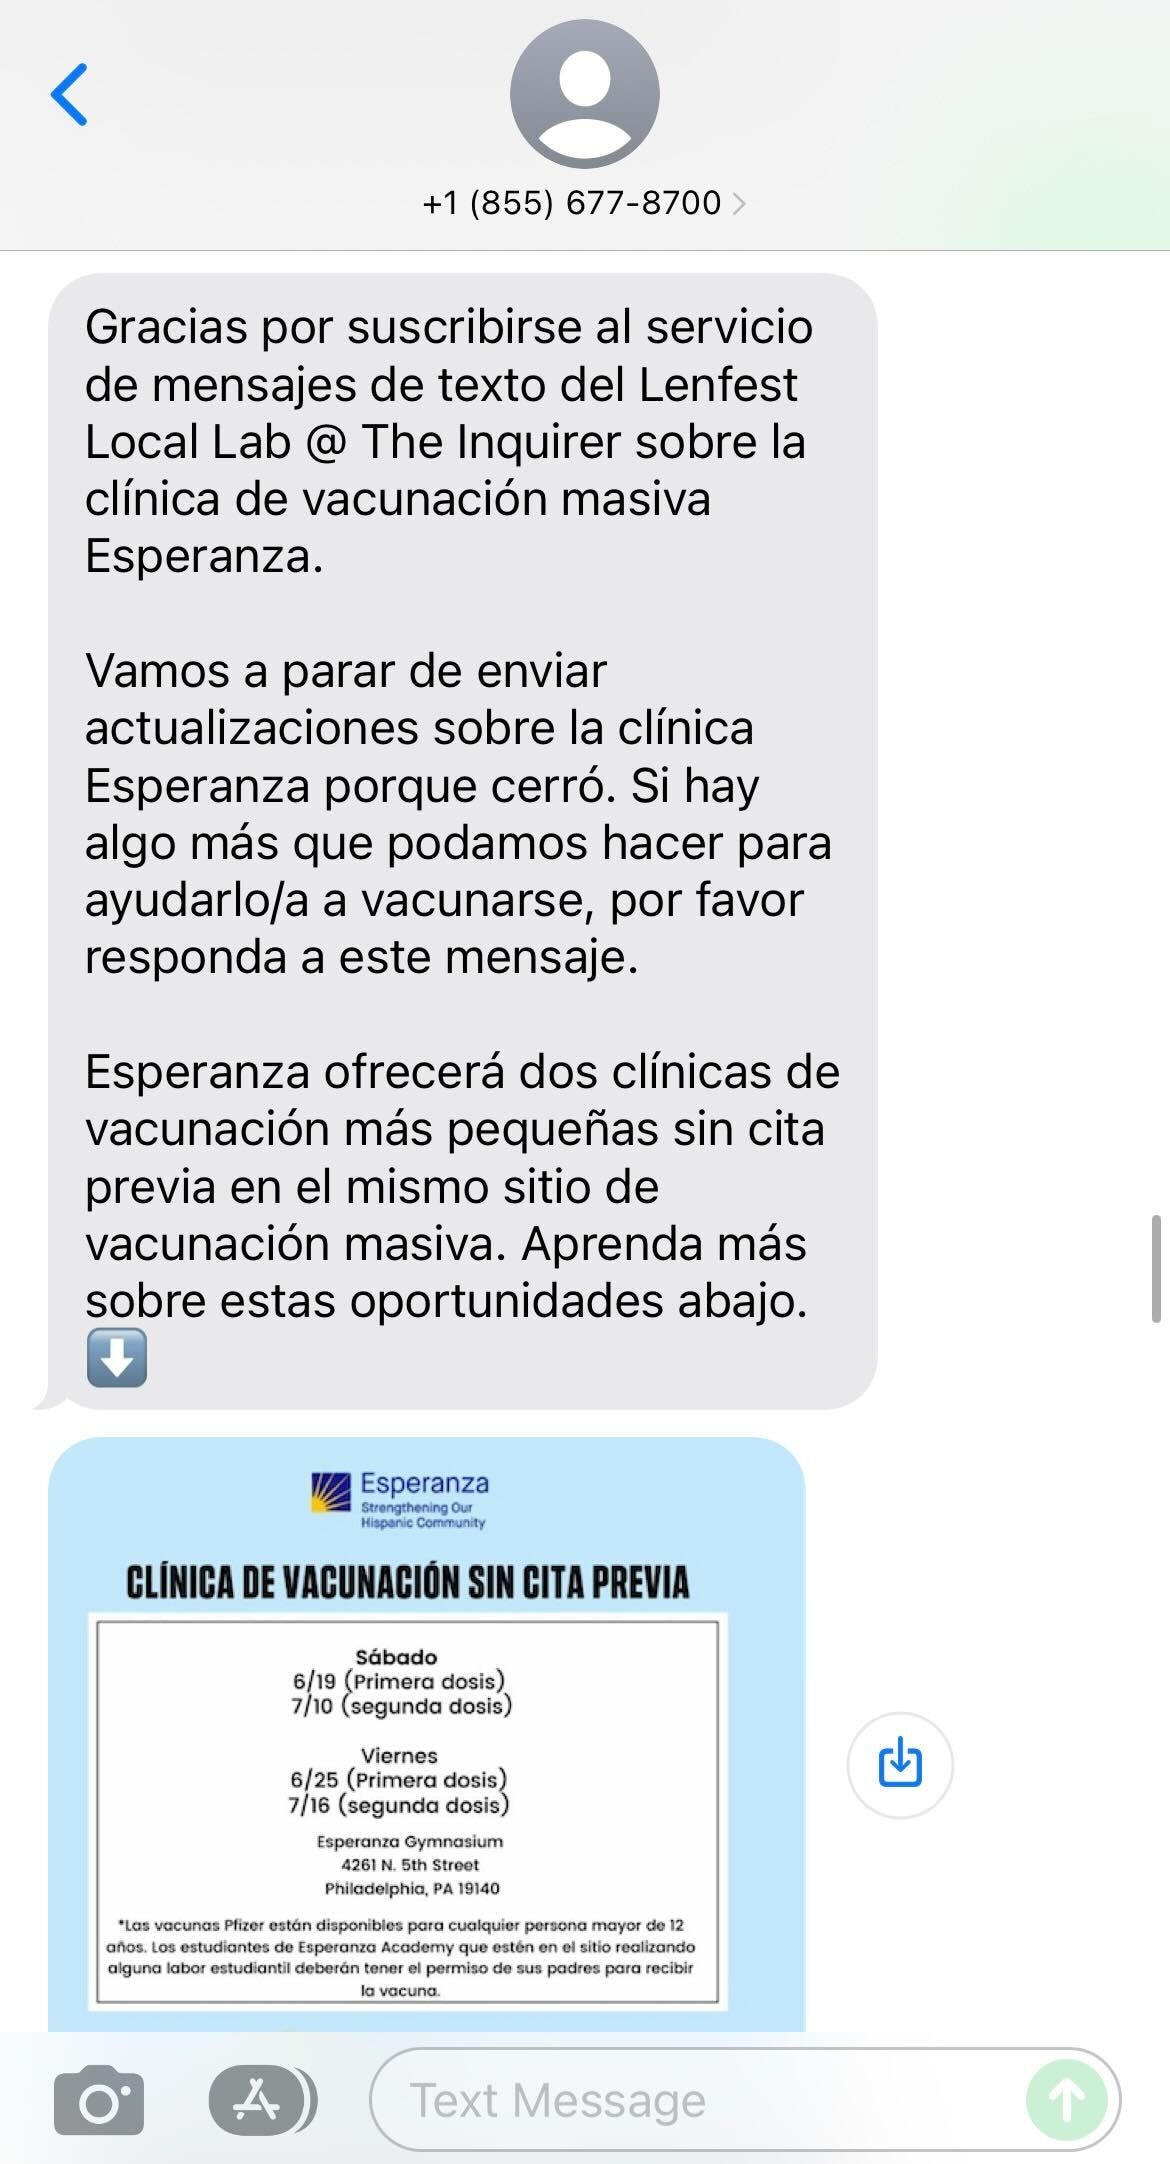 Prioritizing action: How we created a bilingual texting service to help get  people vaccinated., by Kelly Brennan, The Lenfest Local Lab @ The  Inquirer